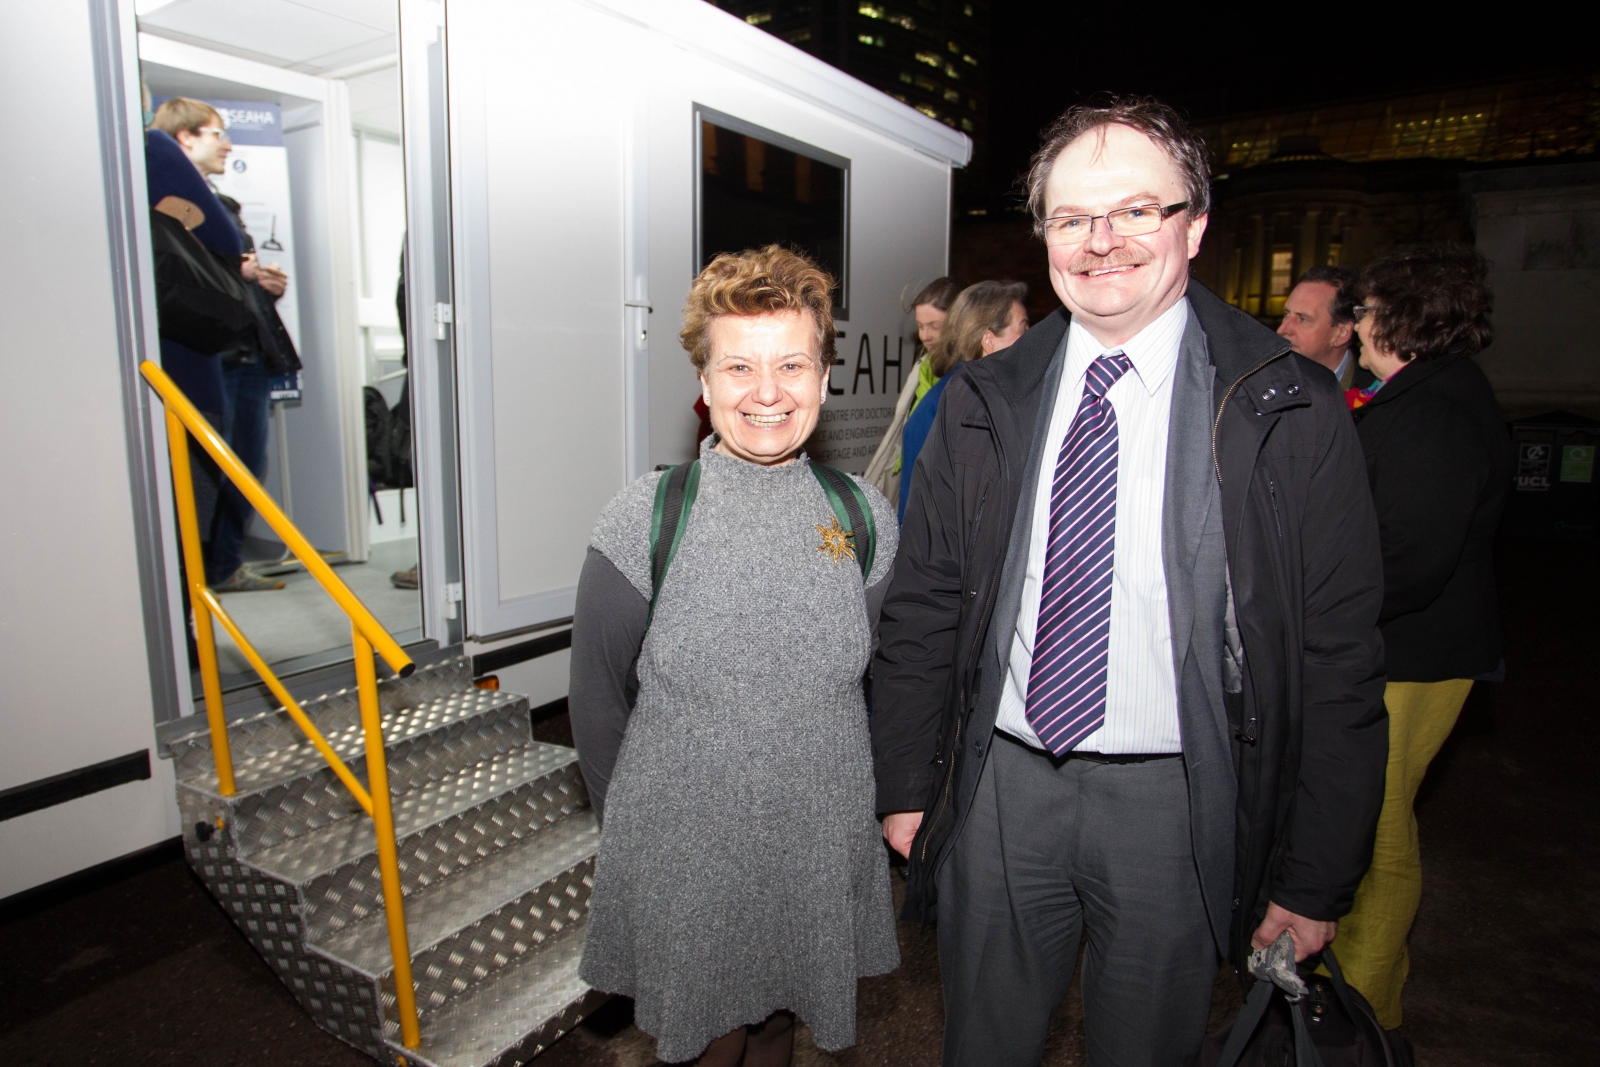 Professor May Cassar (UCL) and Gary Grubb (AHRC) outside the SEAHA Mobile Heritage Lab at the 2015 NHSF Members and Friends event.